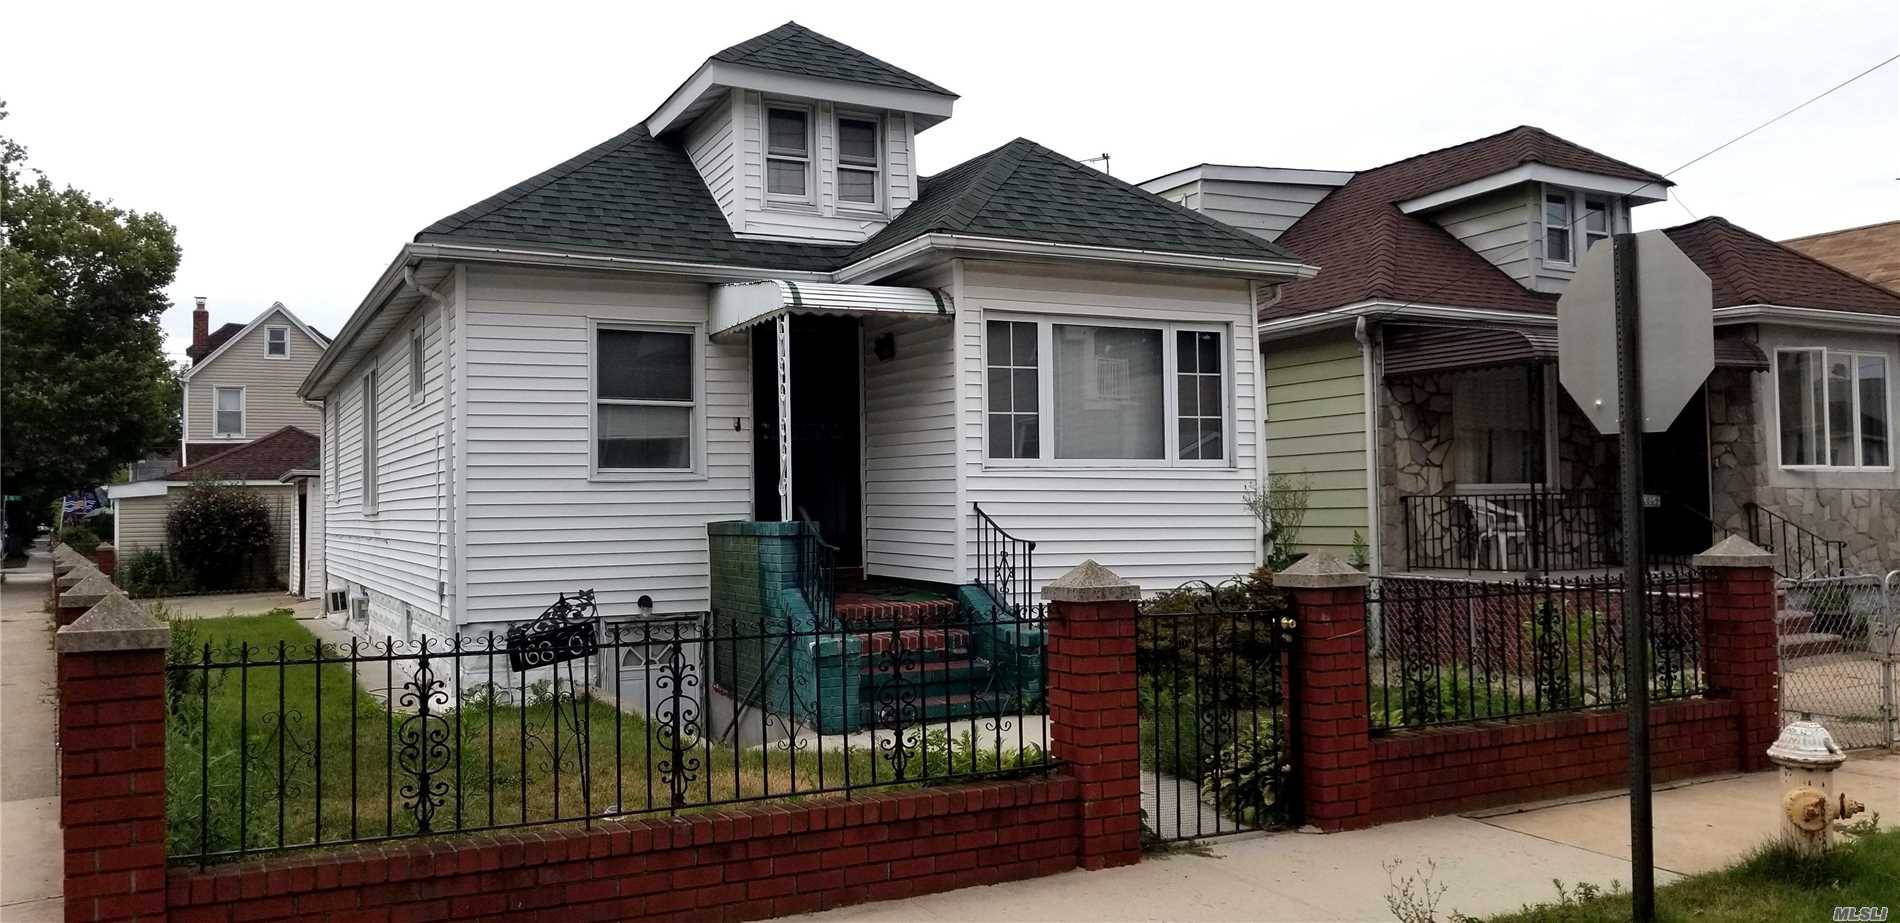 Corner Home, Single Family, Renovated, 3 Bedrooms, 1 Bathrooms, Updated Kitchen, Fairly New Boiler & Hw Heather, New Carpets, Flooring.